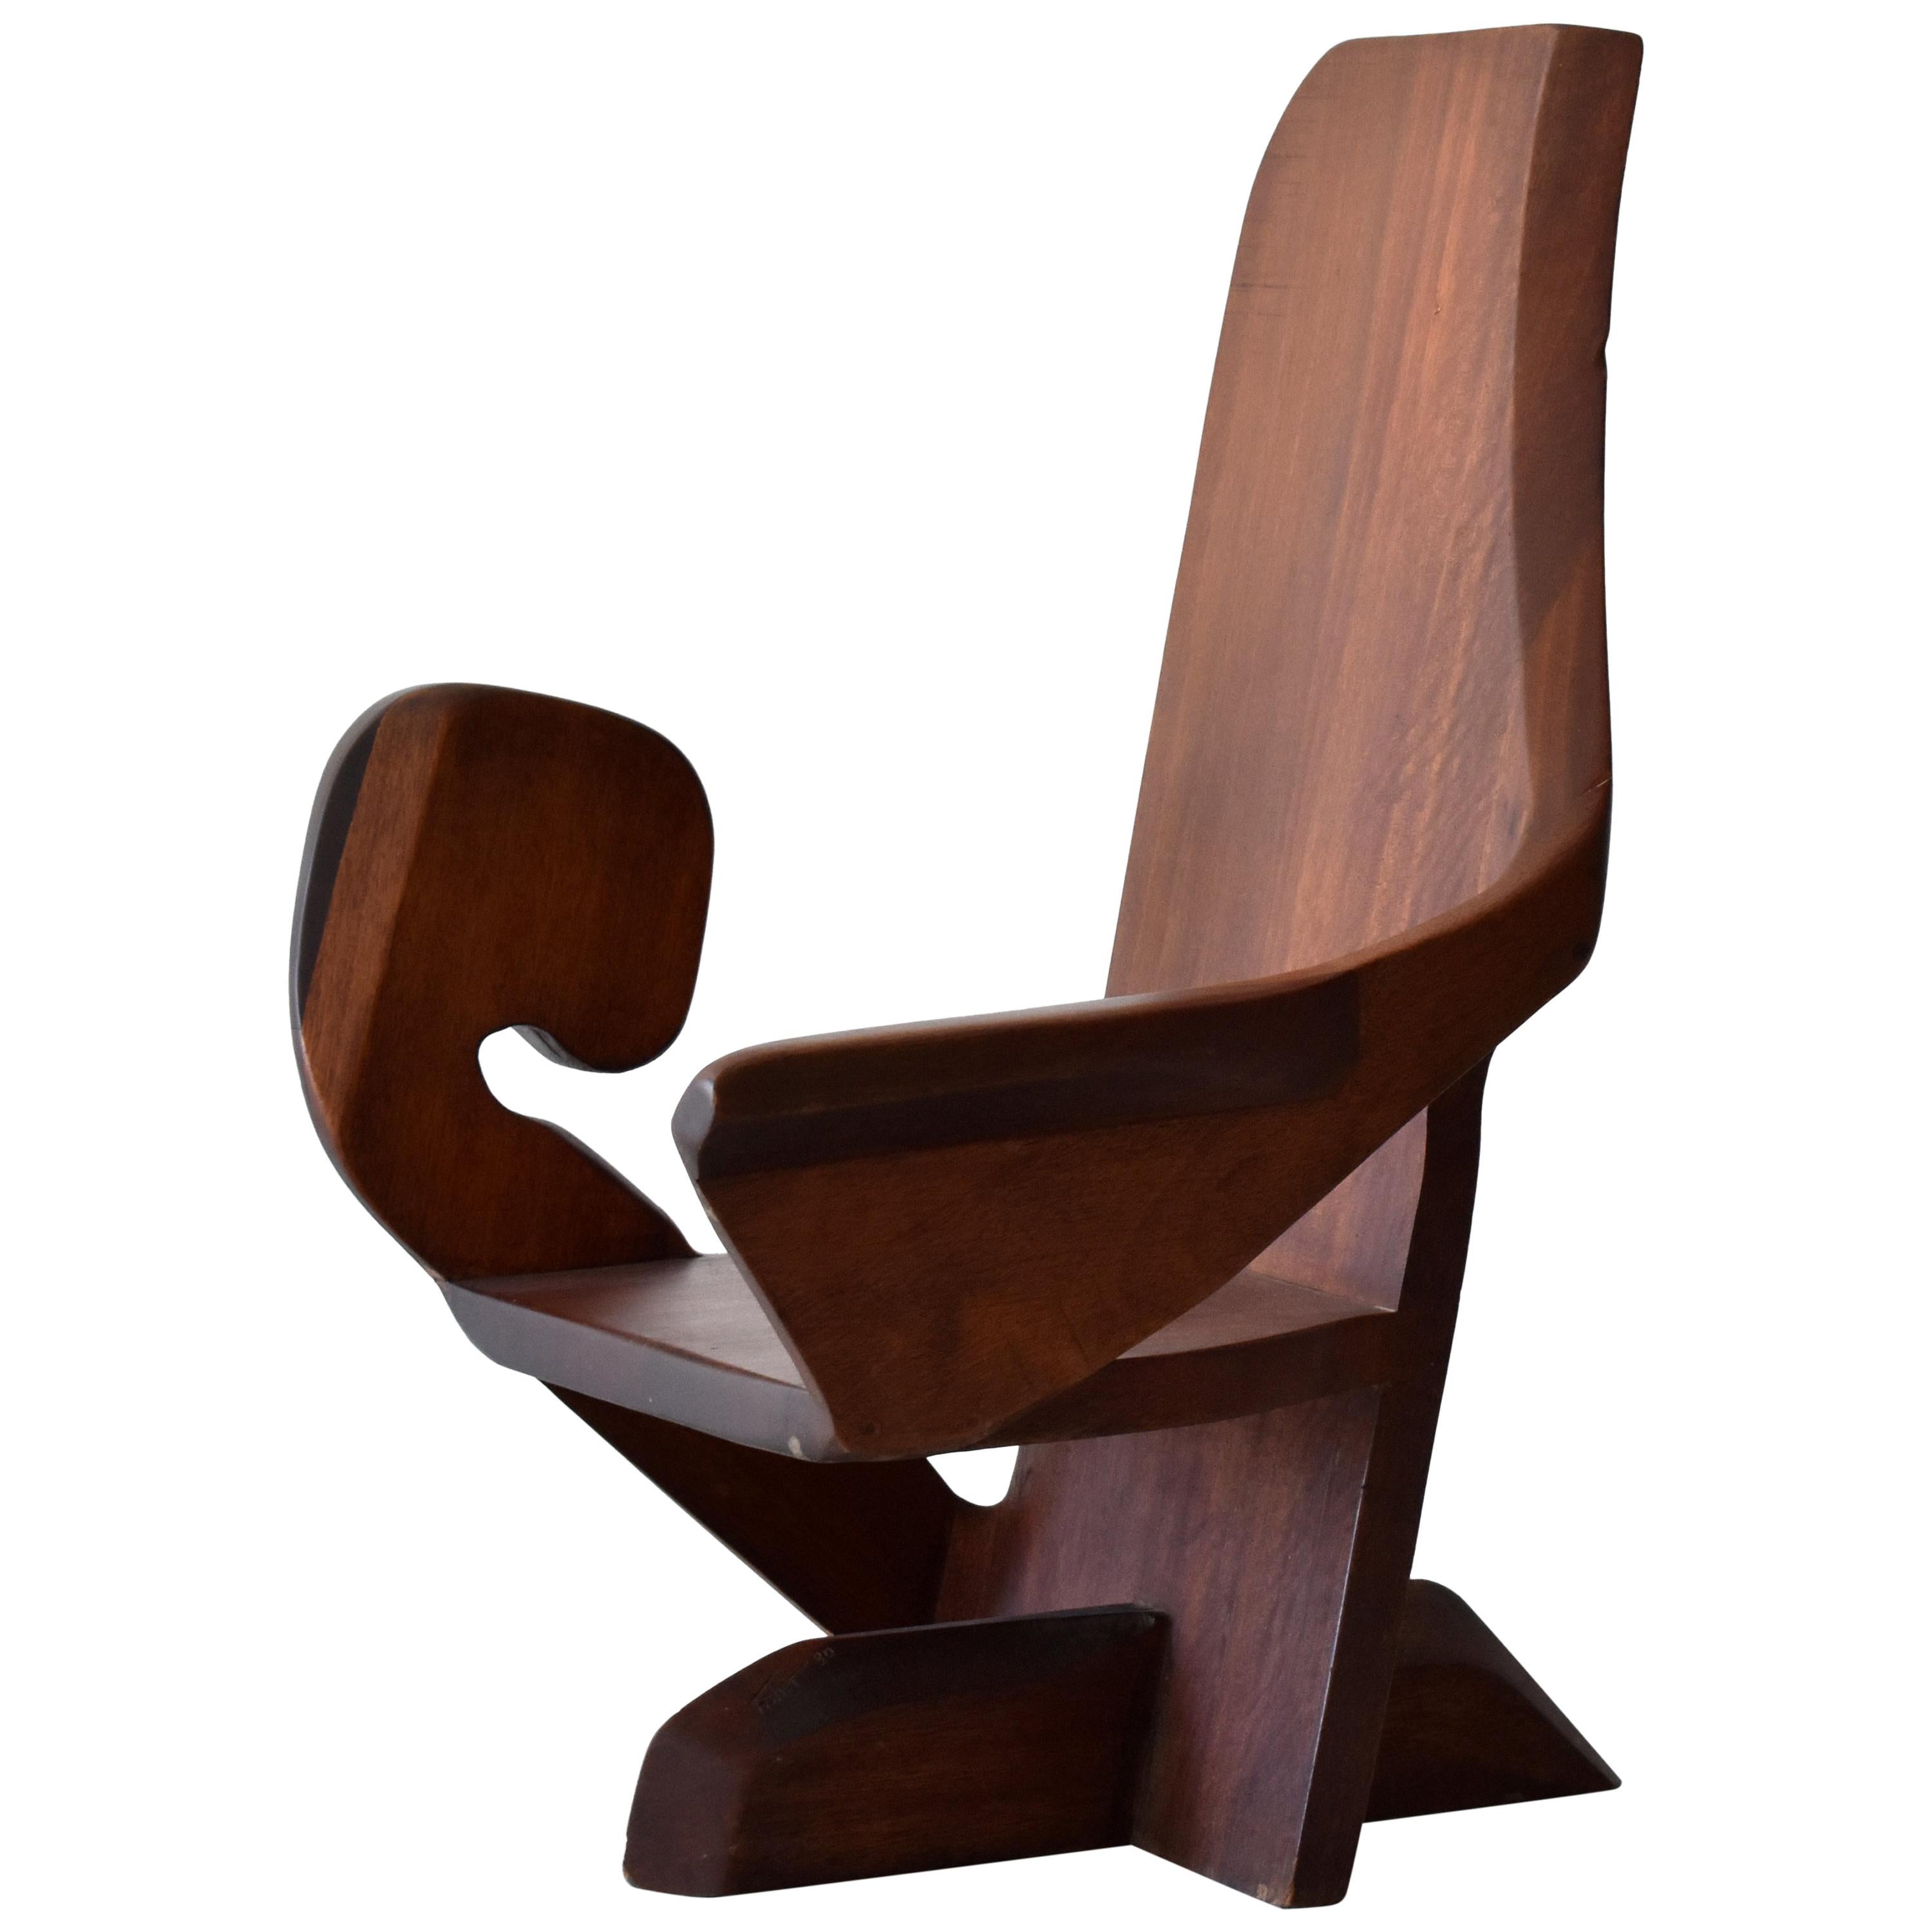 Unknown Studio Craftsman, Armchair in Sculpted and Joined Hardwood Slabs, 1980s